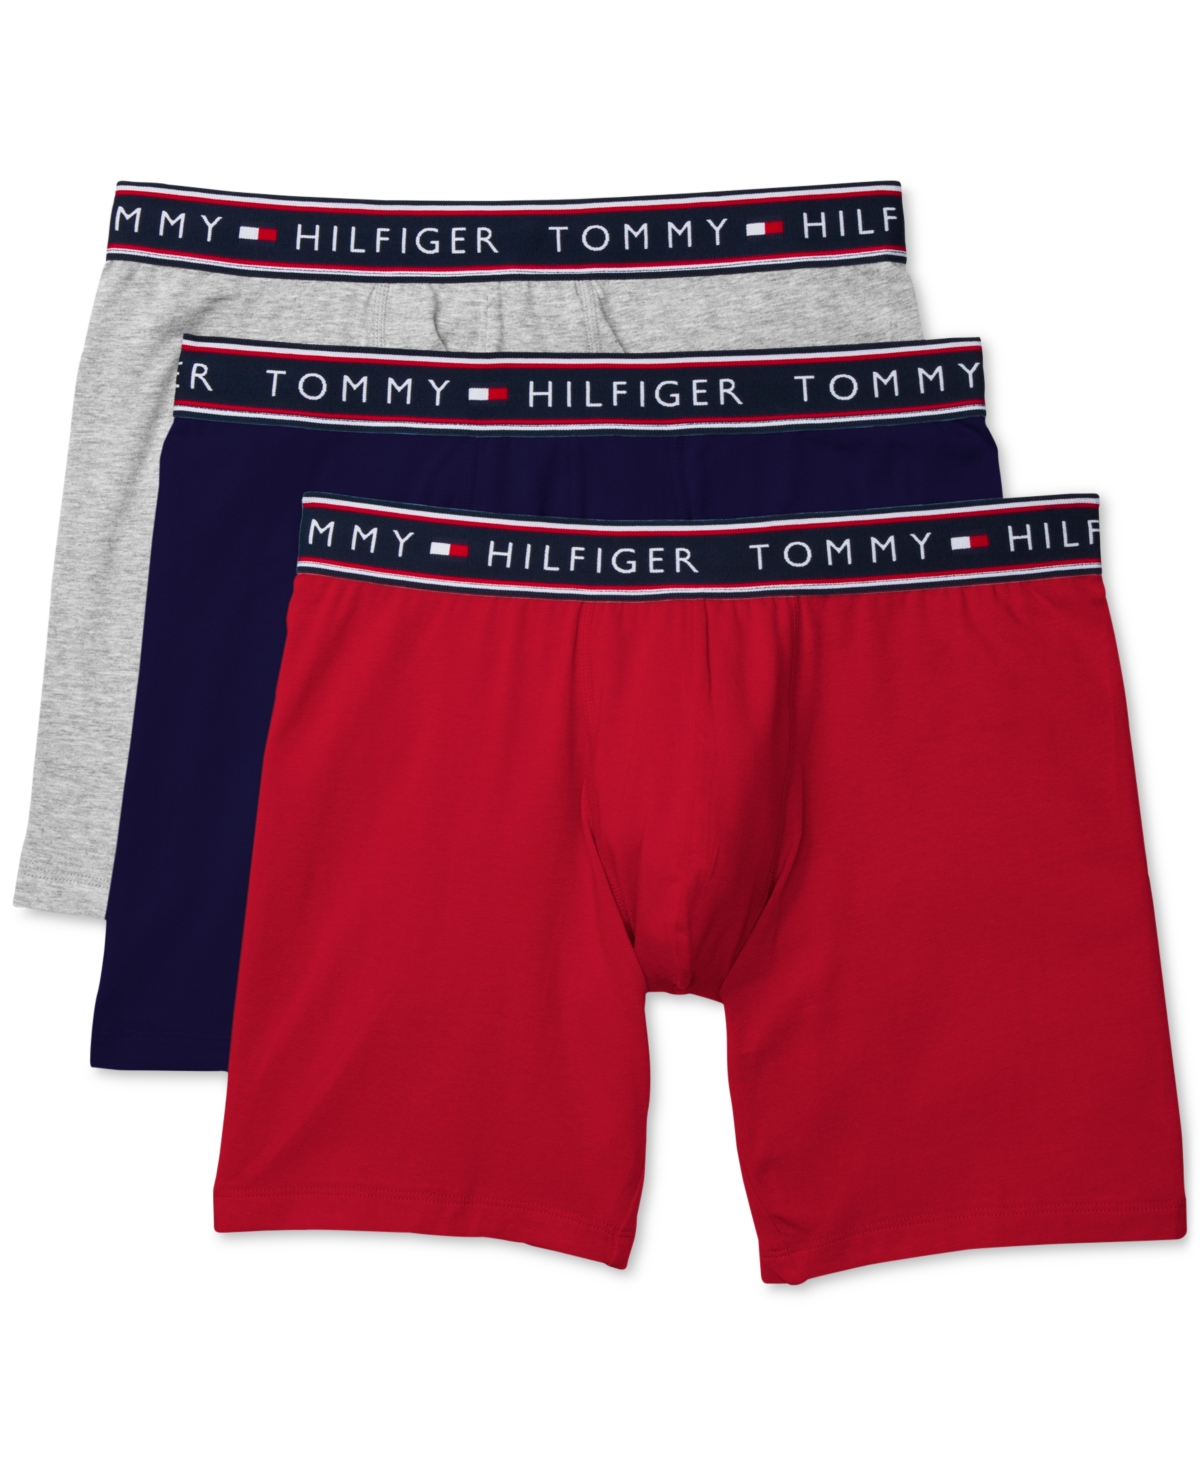 UPC 088541539364 product image for Tommy Hilfiger Men's Cotton Stretch Boxer Brief, 3 Pack | upcitemdb.com